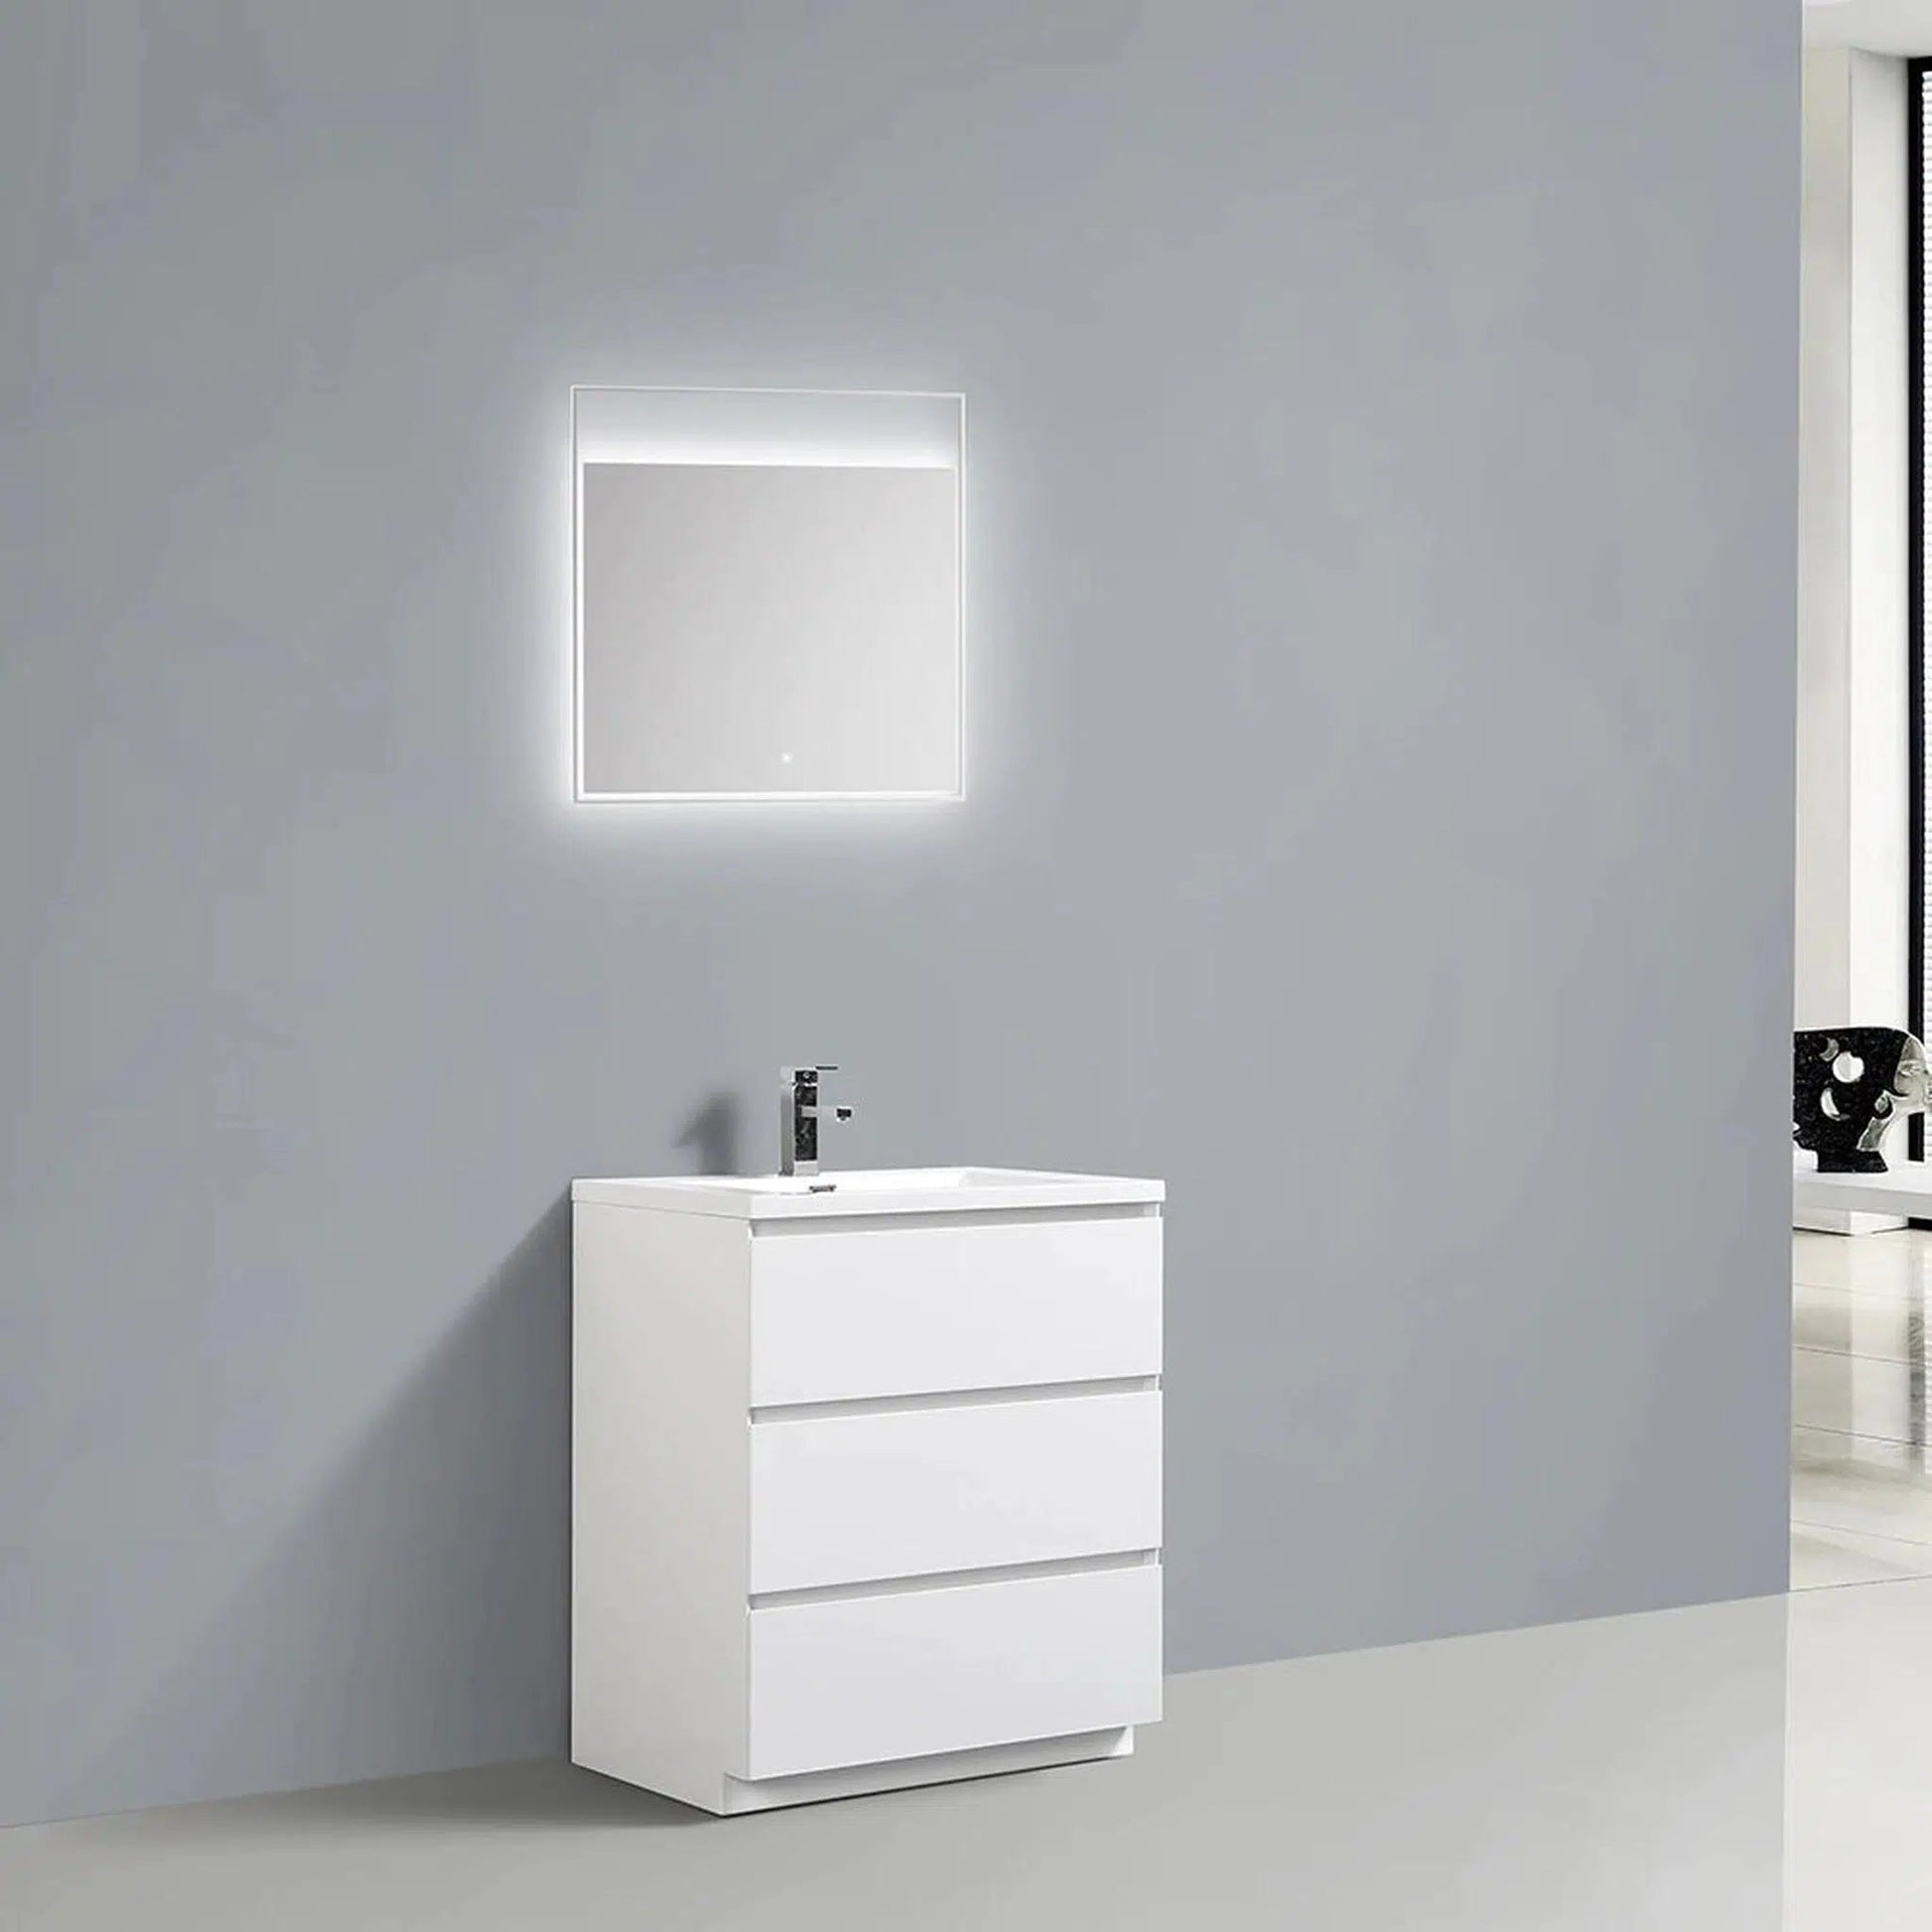 TONA Edison 30" White Freestanding Bathroom Vanity With Artificial Stone Integrated Top & Sink